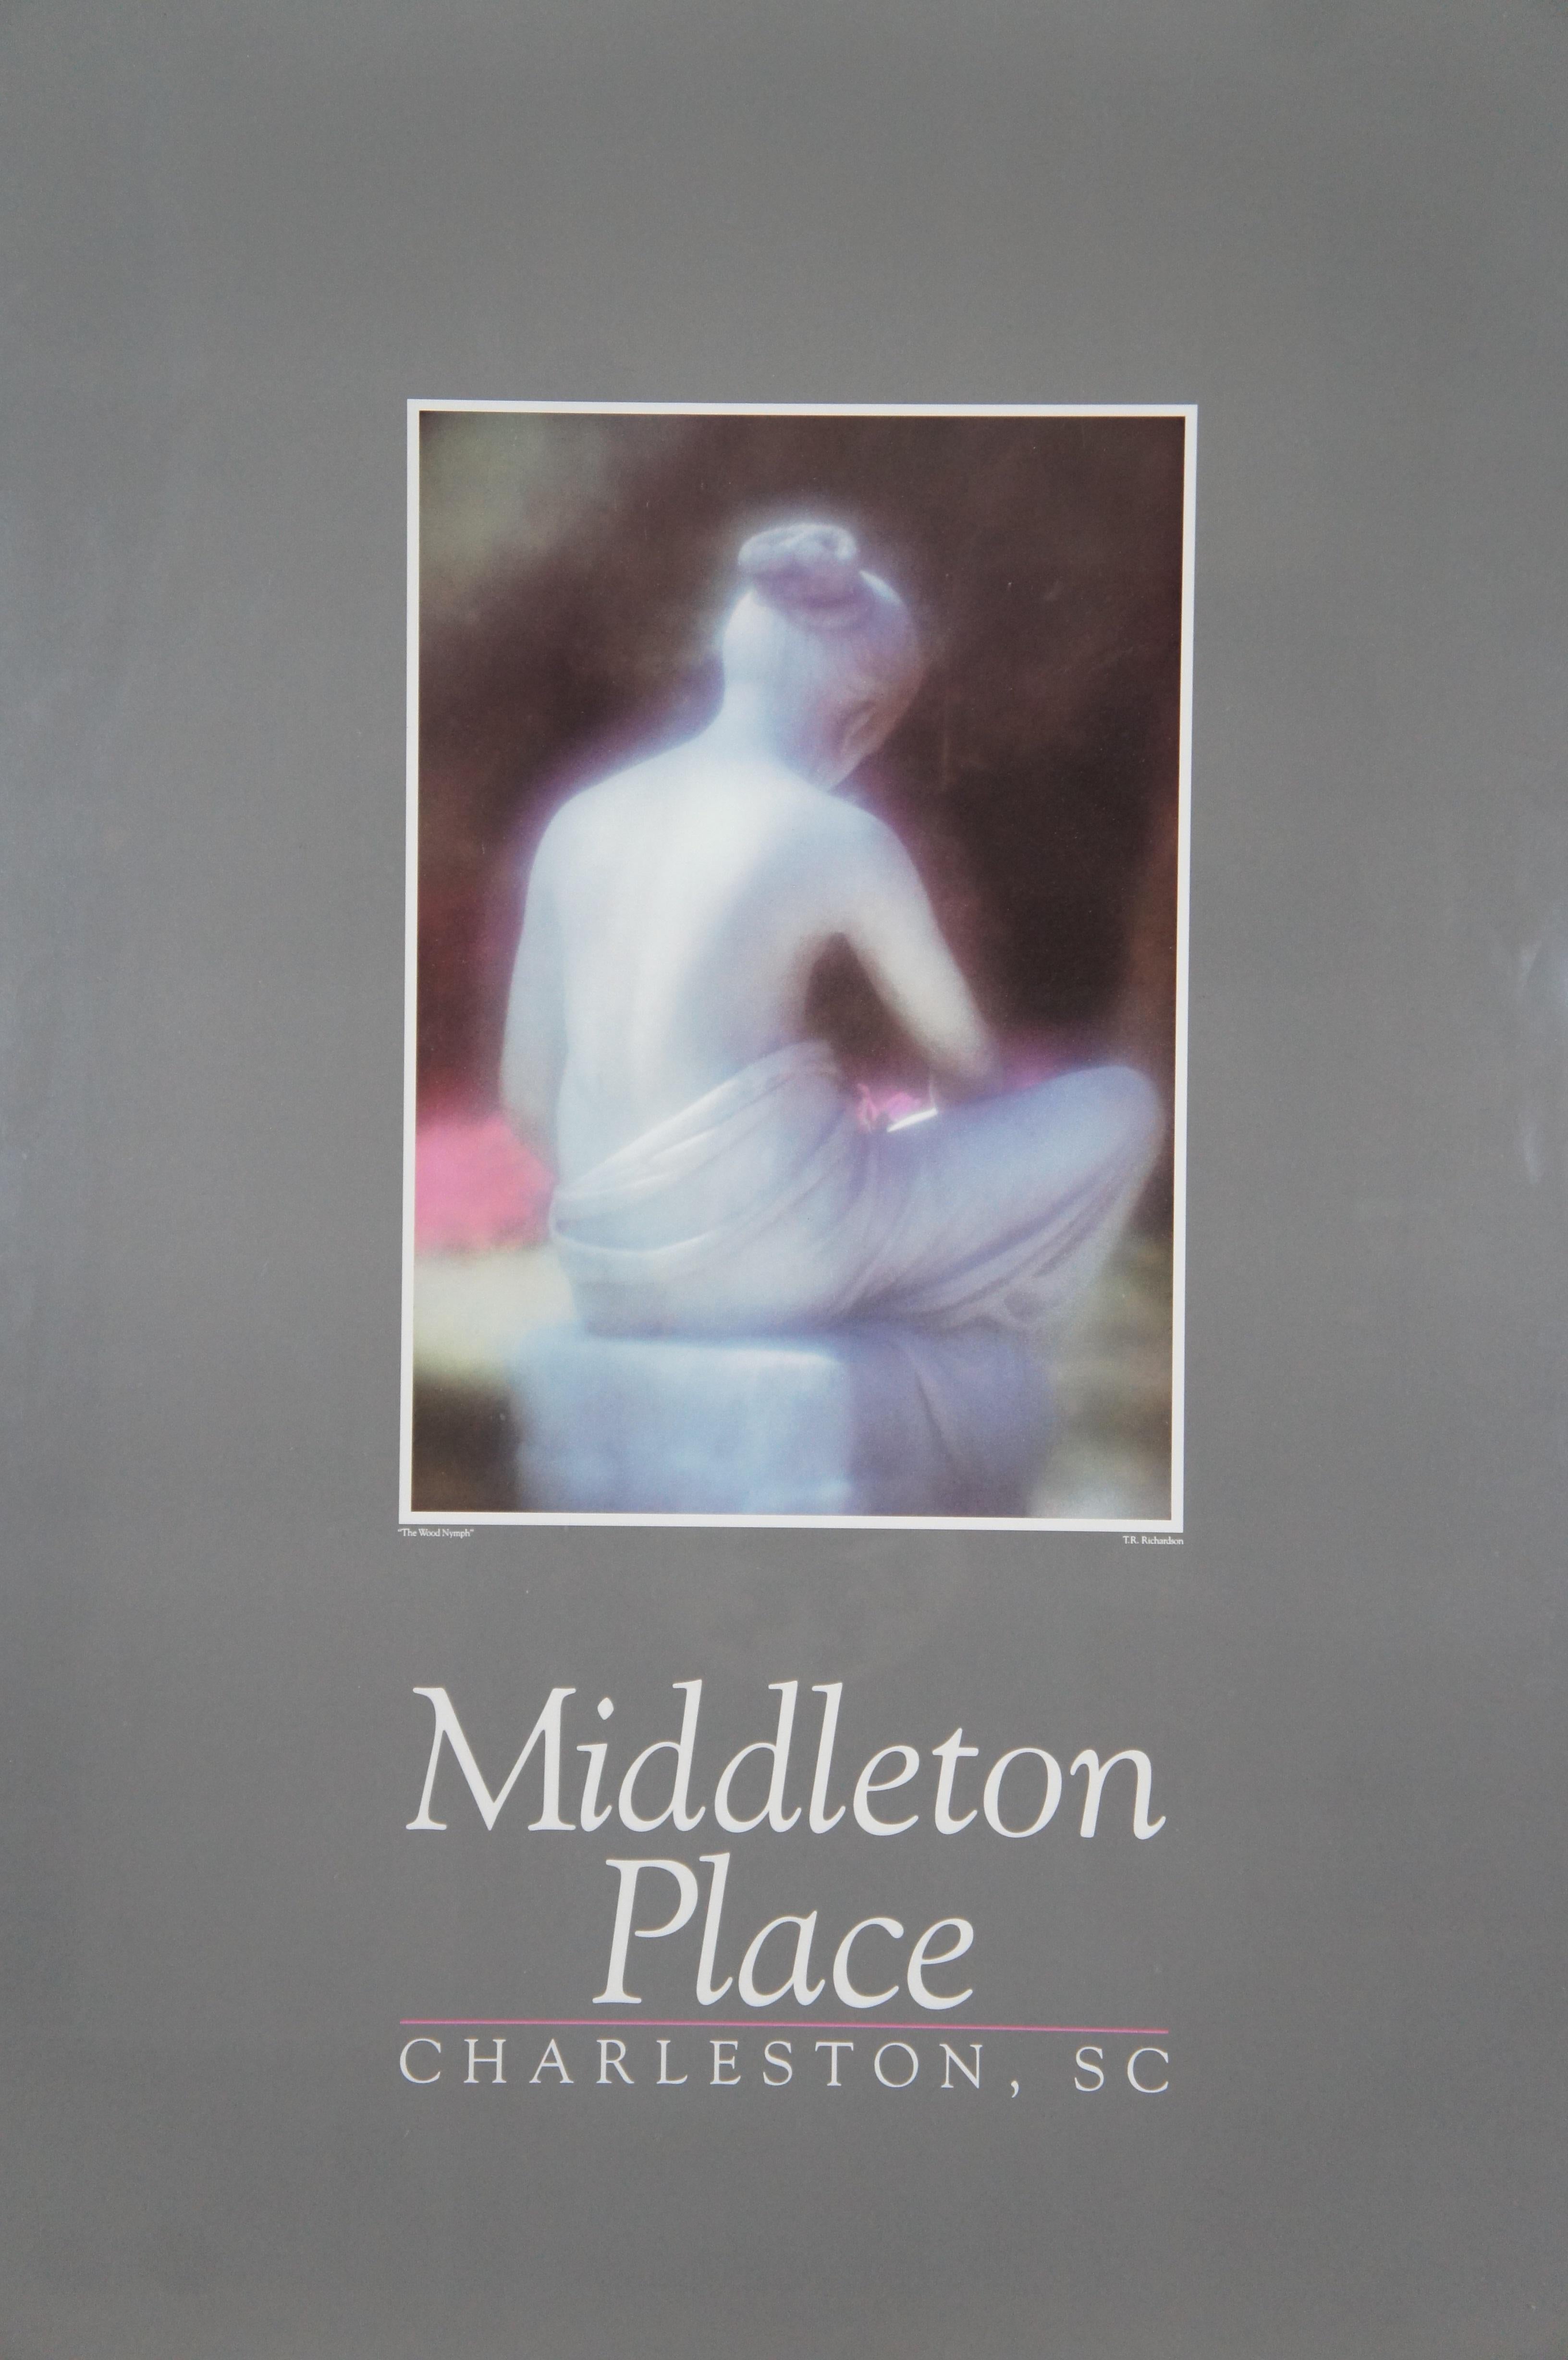 Paper 2 Middleton Place Wood Nymph Statue Framed Lithograph & Poster Print For Sale